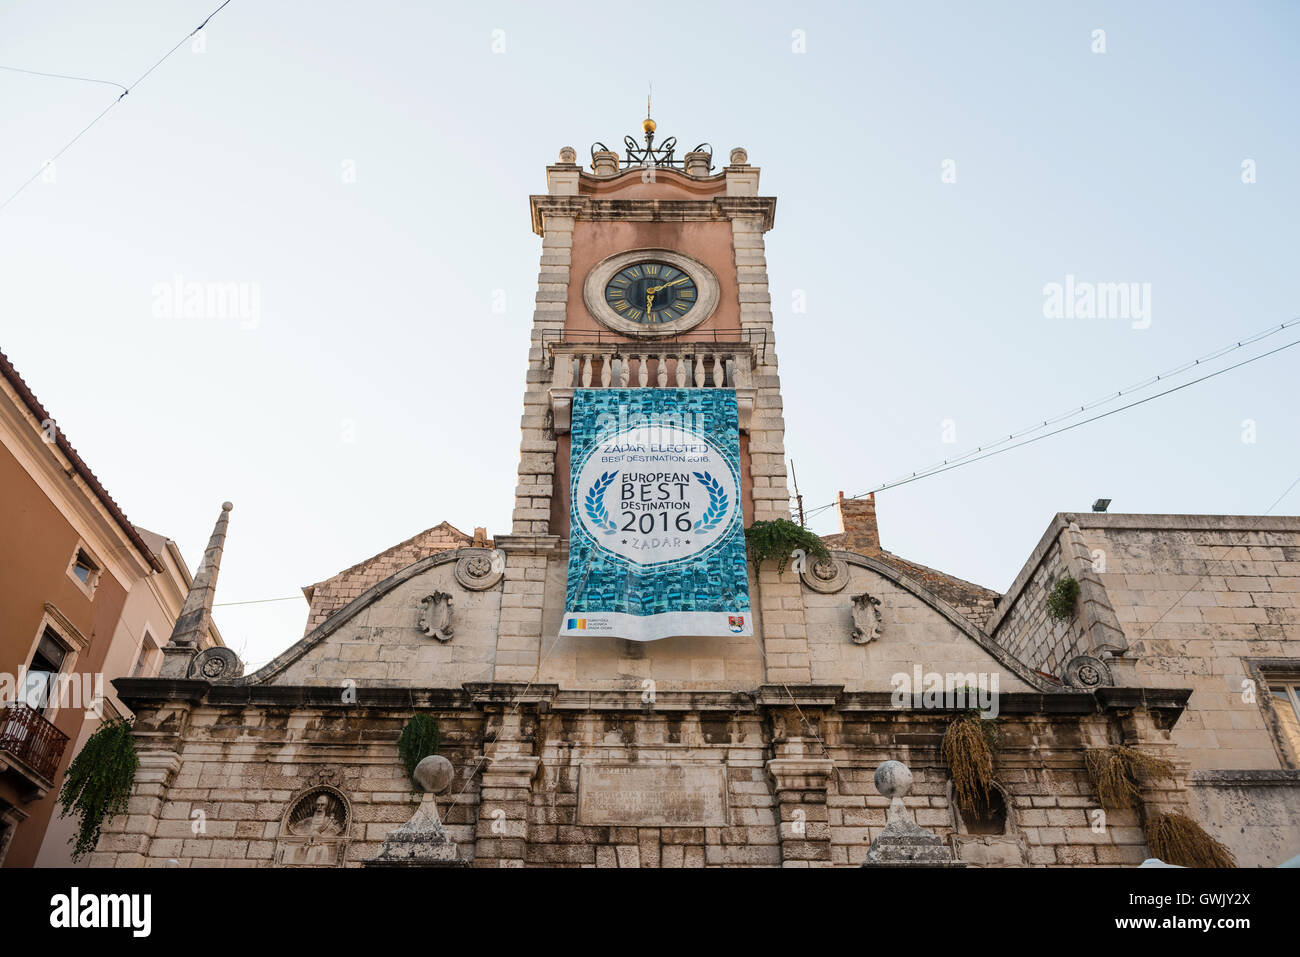 ZADAR, CROATIA - SEPTEMBER 1, 2016: Poster on City Guard tower - Zadar is elected for European best destination for year 2016 Stock Photo